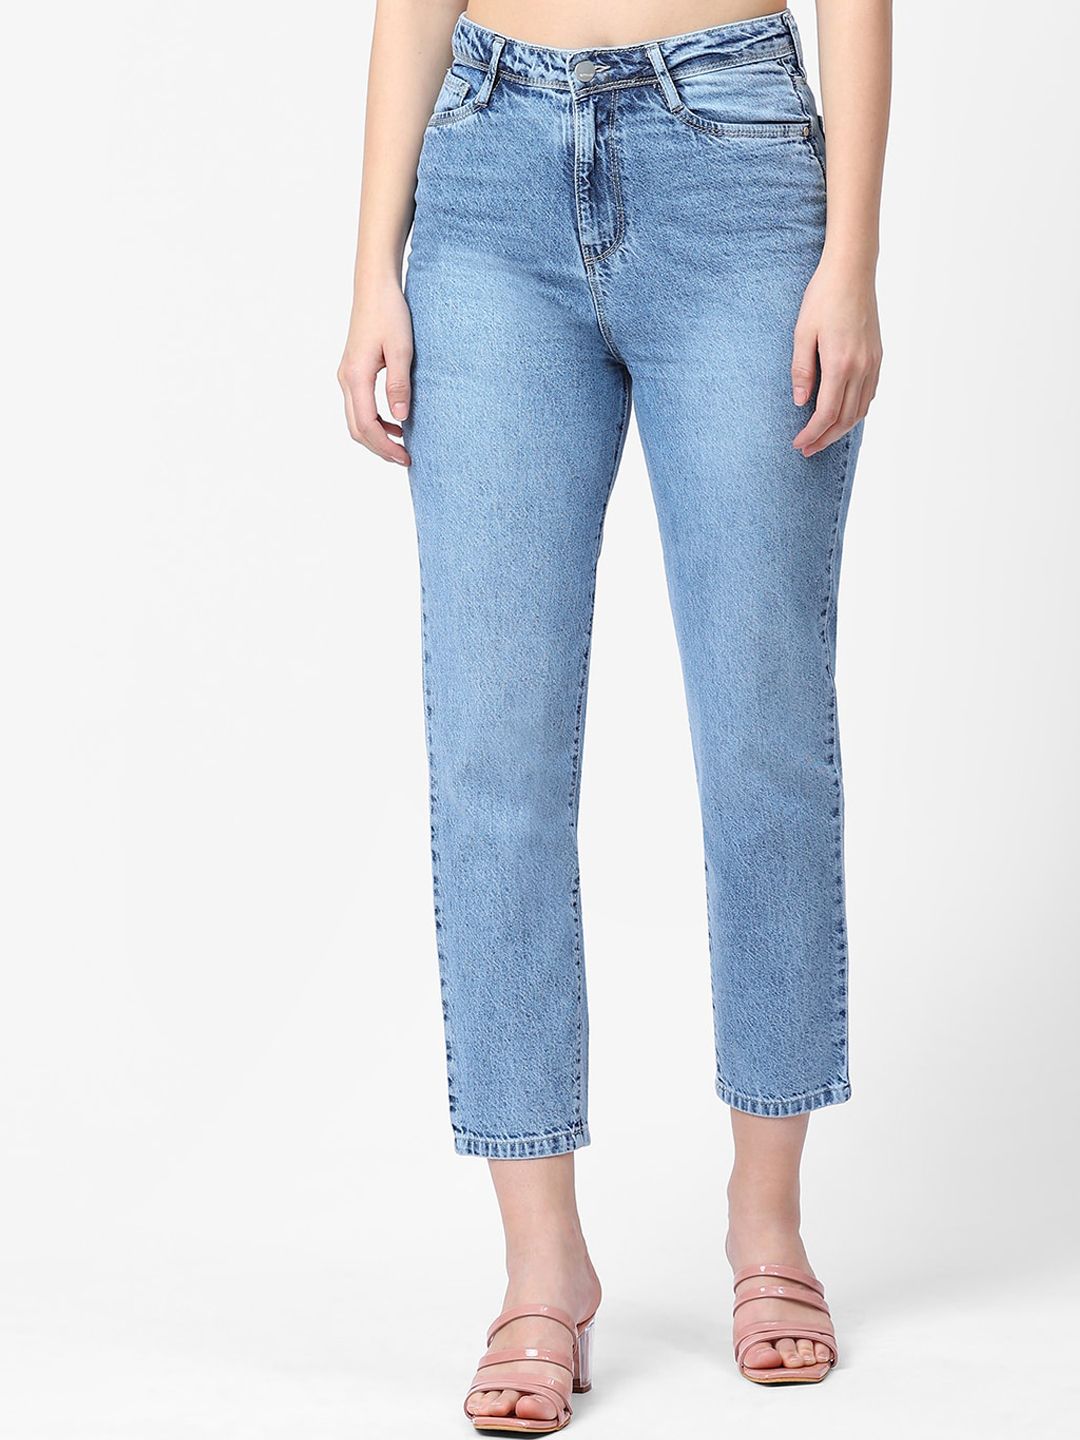 Kraus Jeans Women Blue High-Rise Light Fade Jeans Price in India